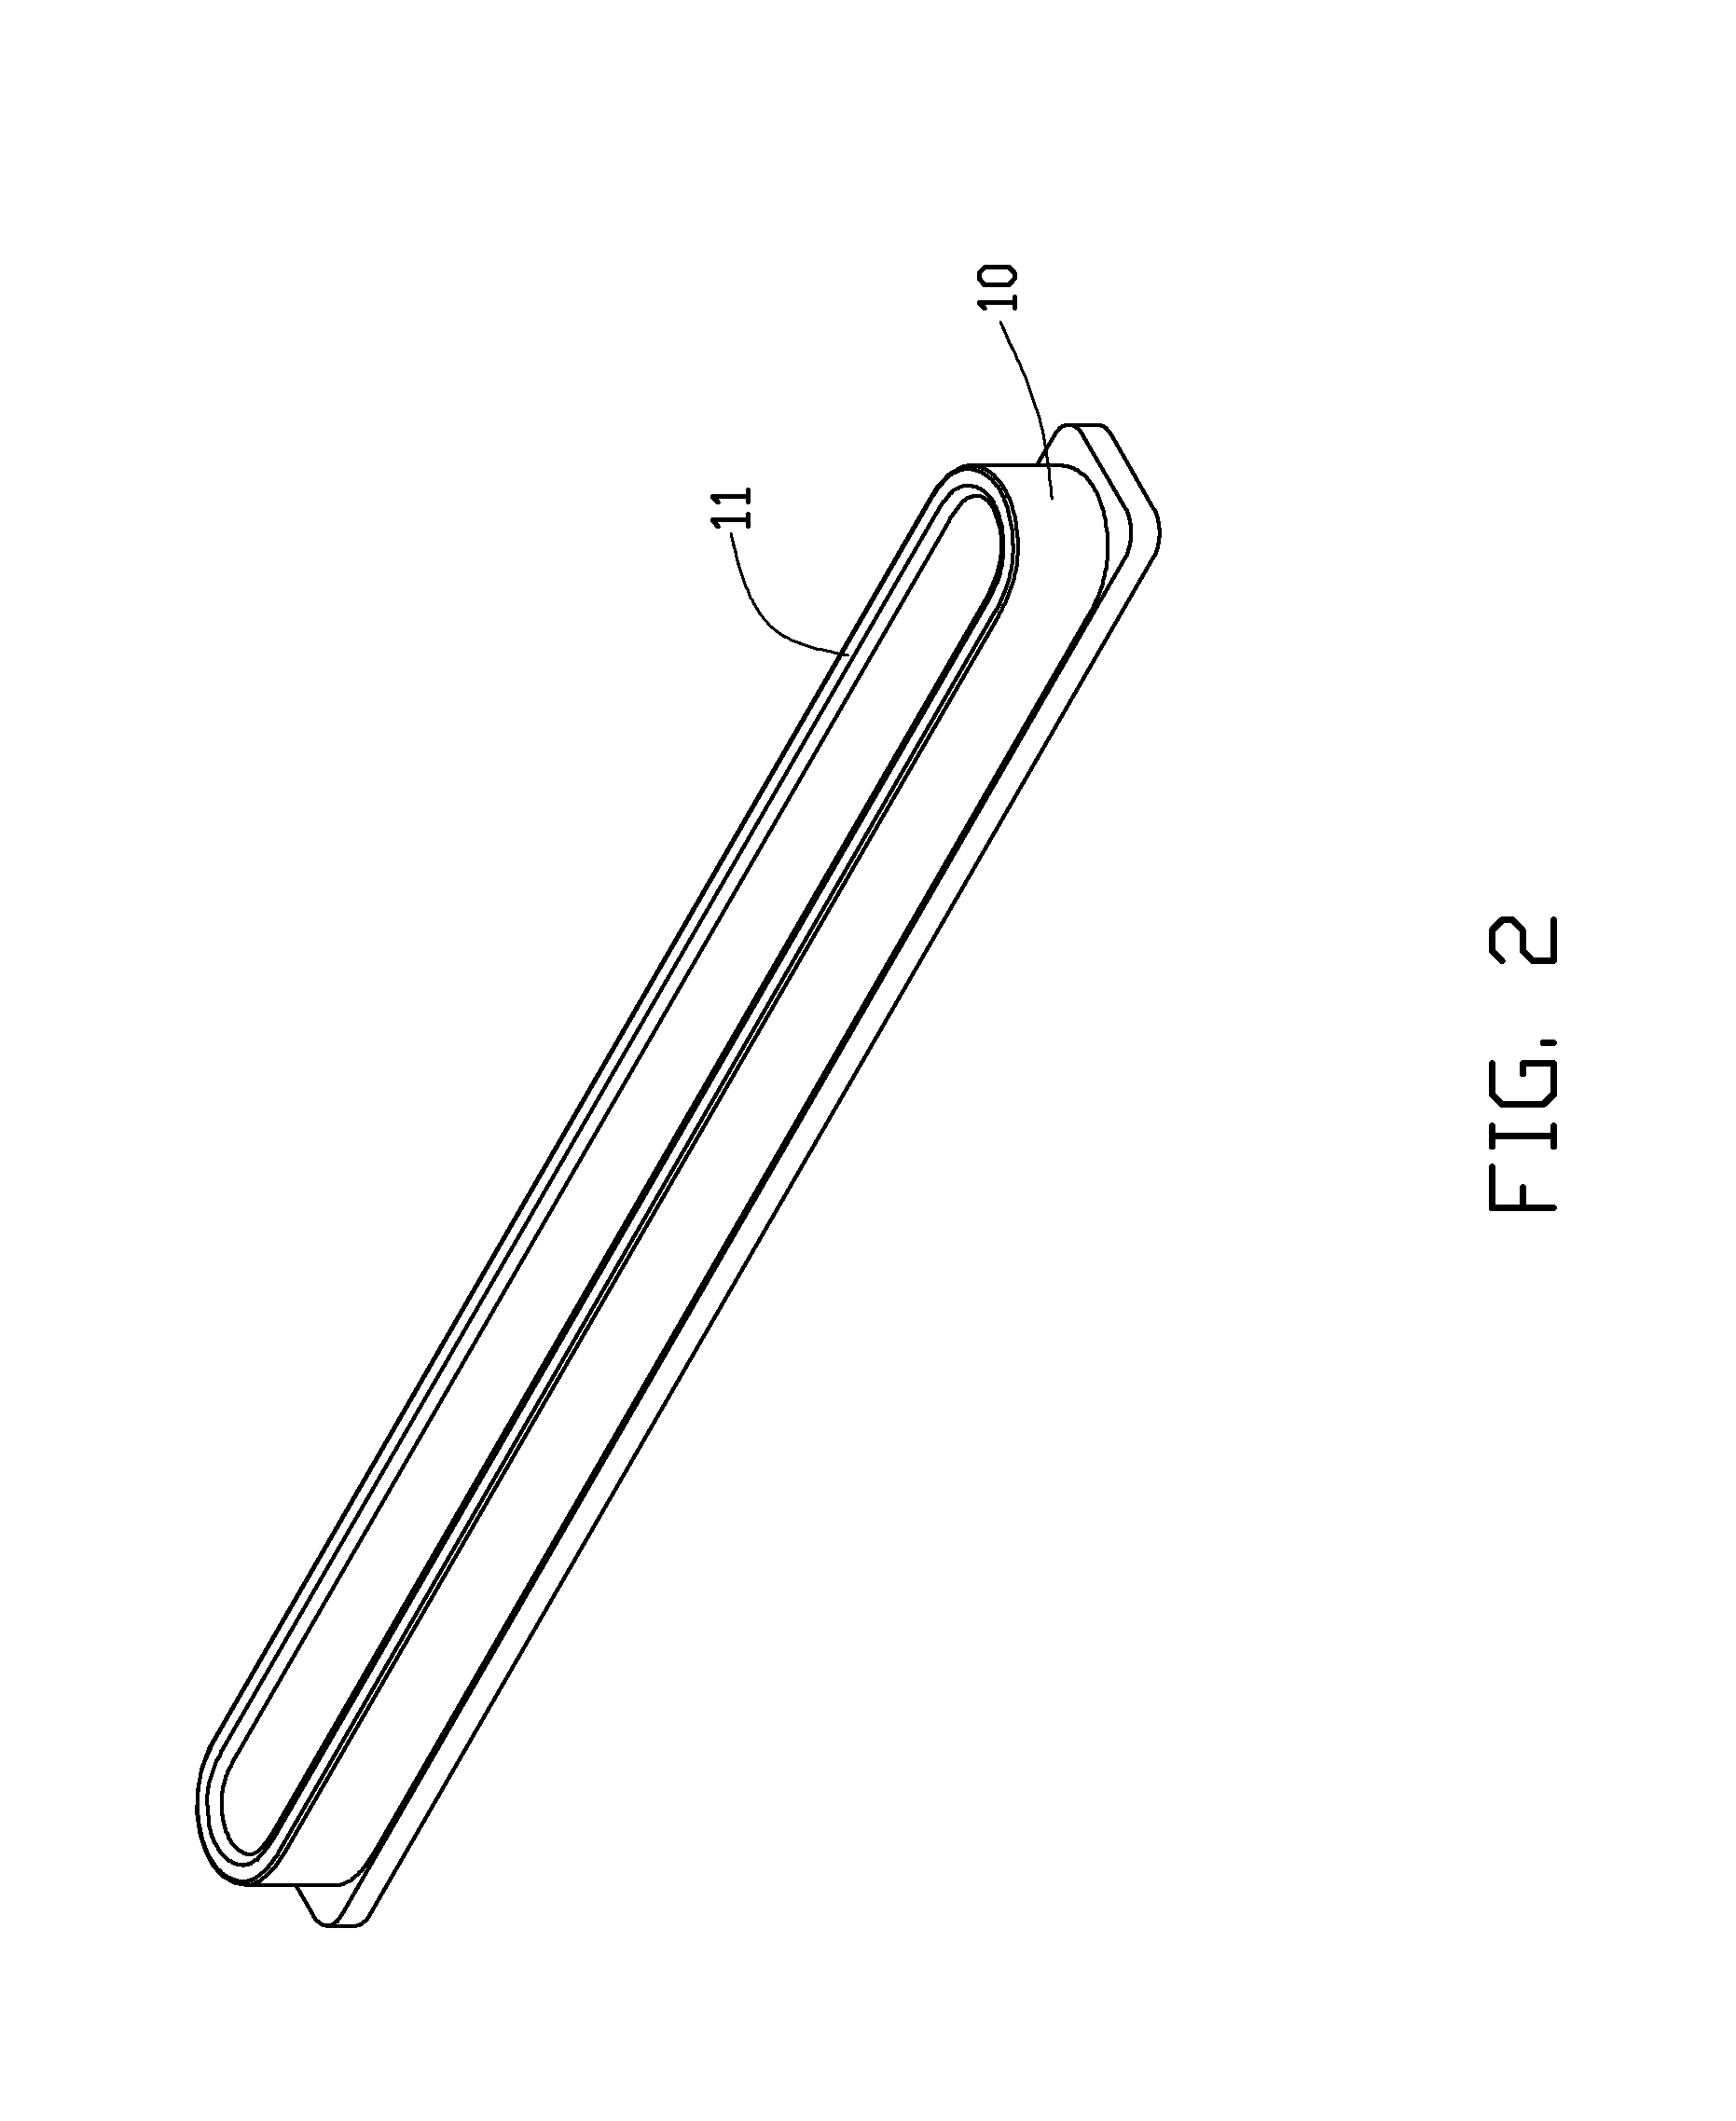 Zr-rich bulk amorphous alloy article and method of surface grinding thereof